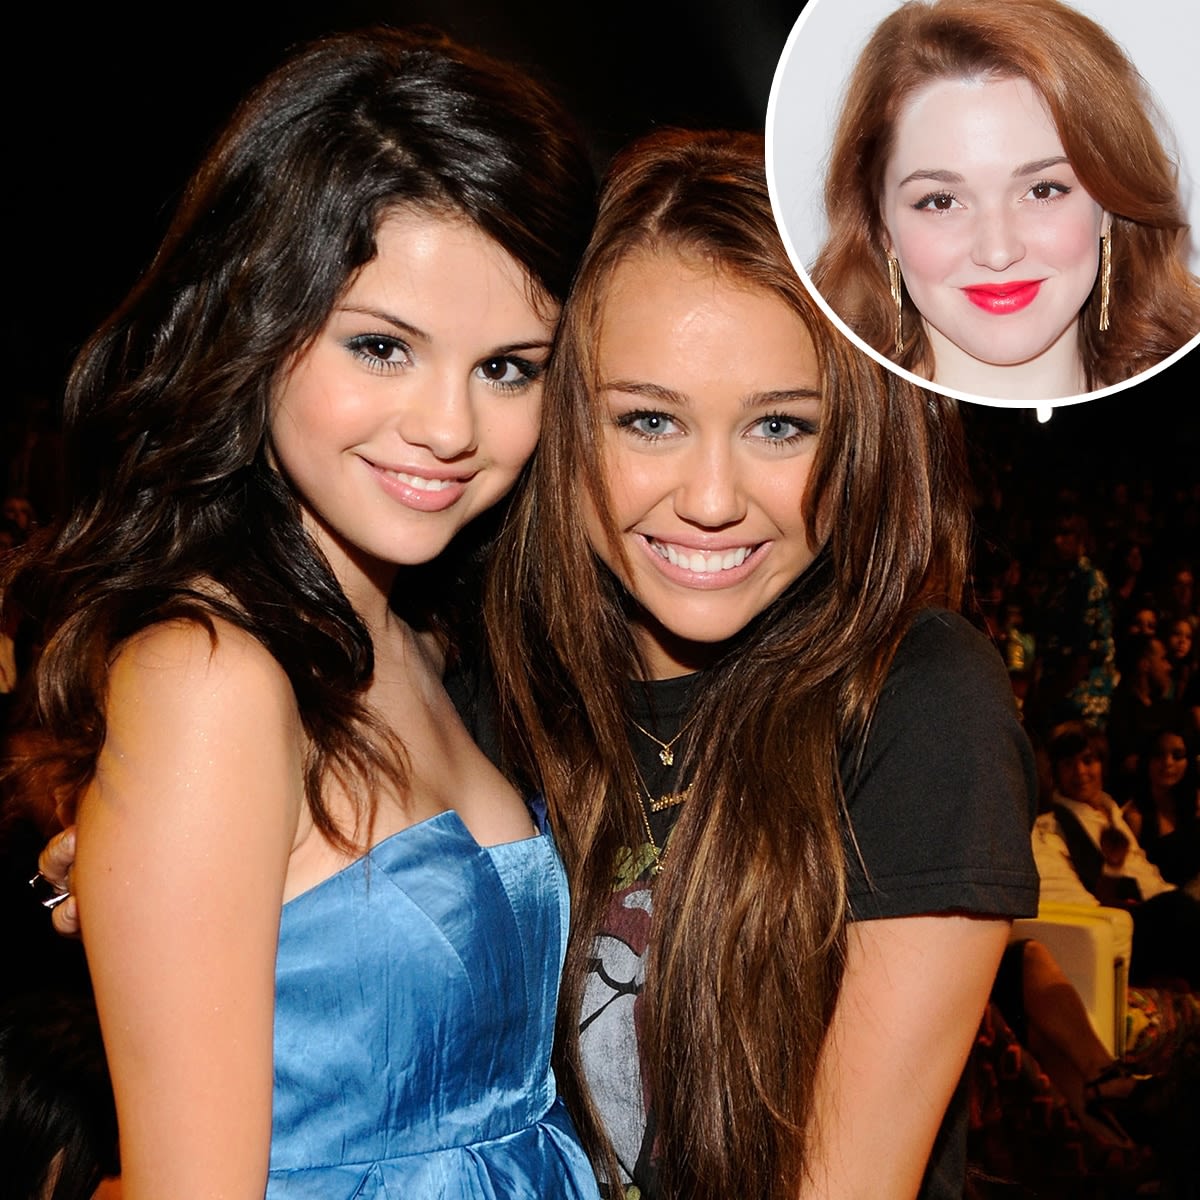 The "Messy High School Nonsense" Between Selena Gomez and Miley Cyrus